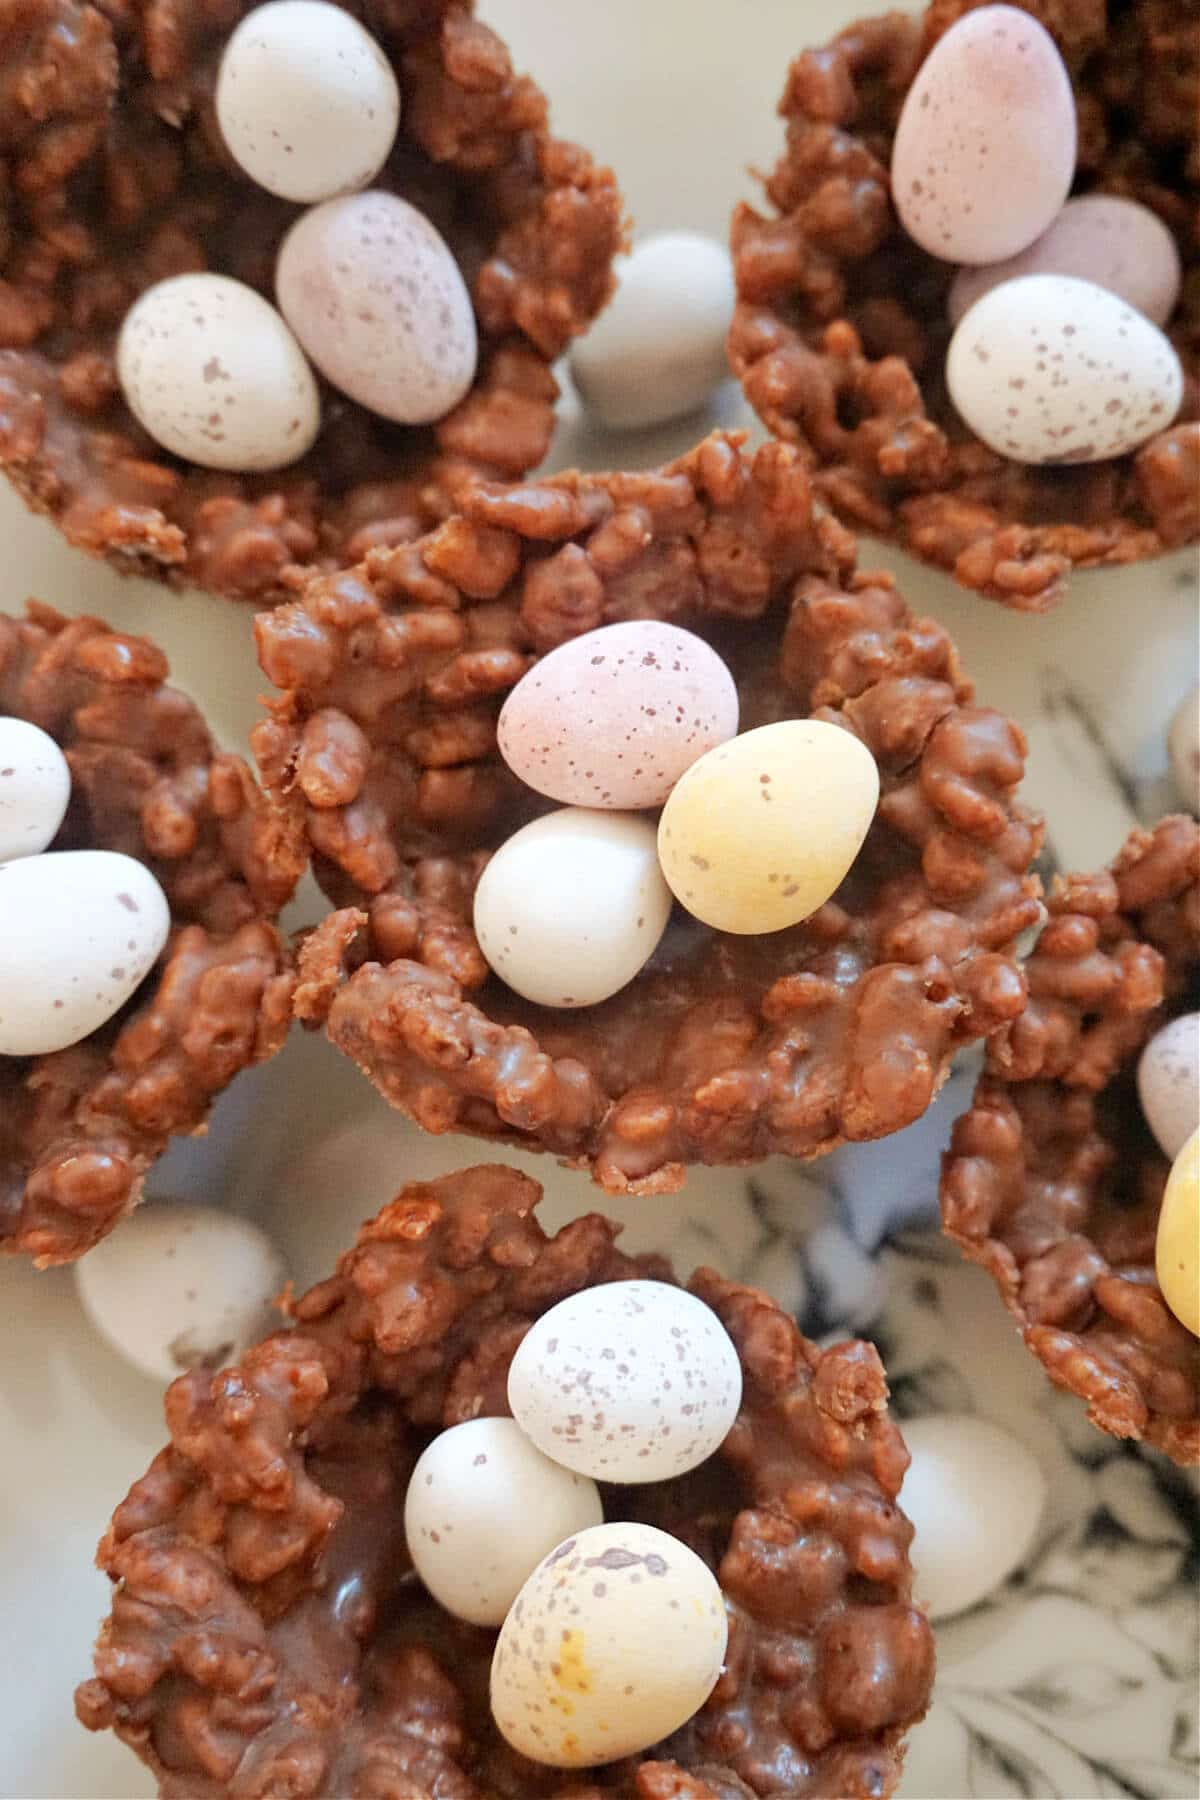 Close-up shot of a chocolate rice krispie nest with 3 mini eggs.